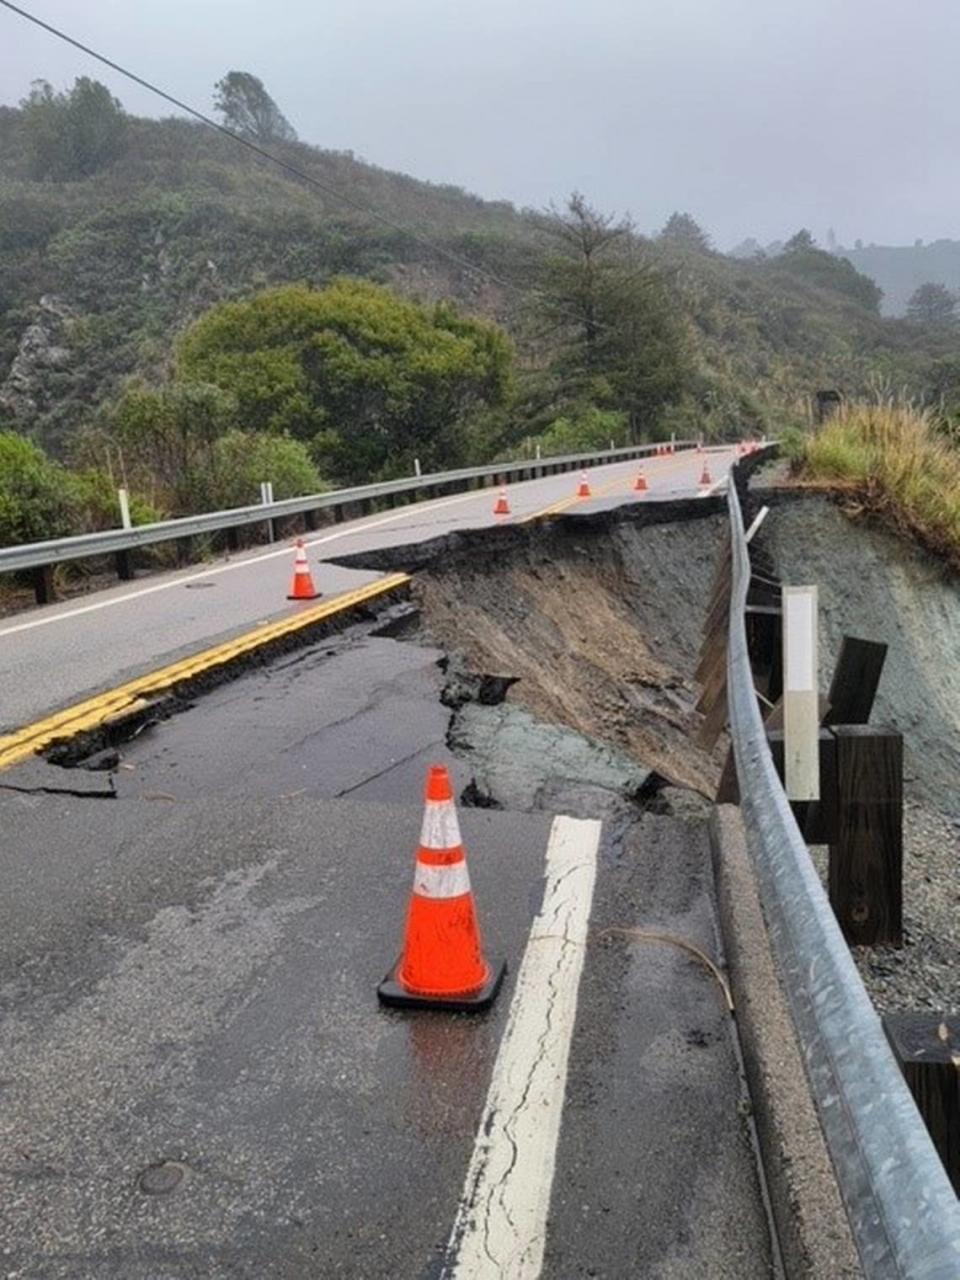 A chunk of Highway 1 has collapsed between the entrance to the Hermitage and the town of Lucia, about 22 miles north of the county line. It was one of several slides that will keep the scenic road closed indefinitely.